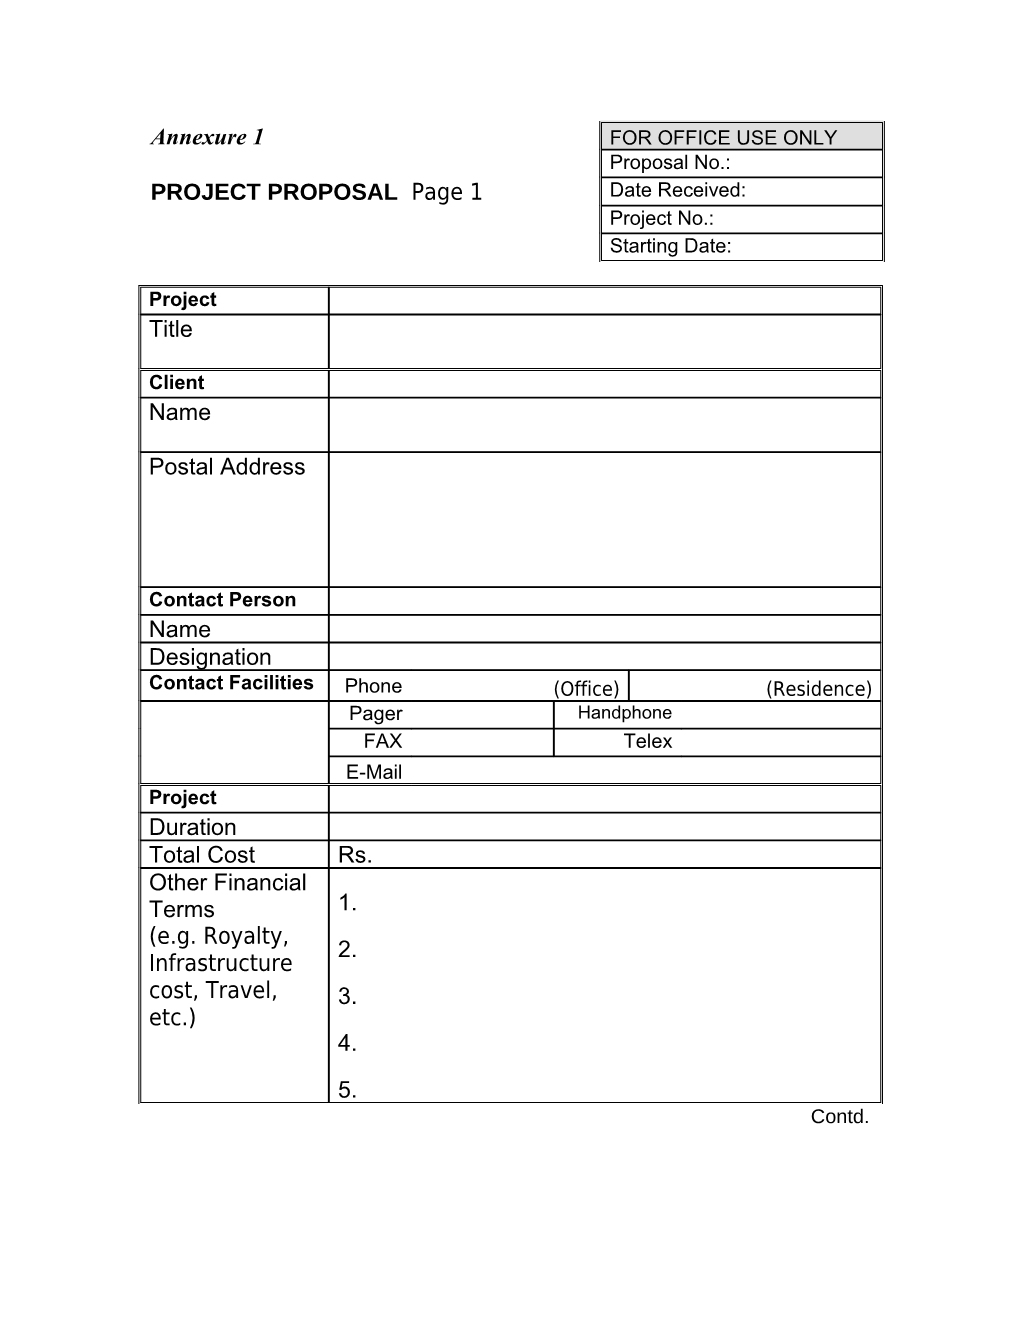 PROJECT PROPOSAL Page 2